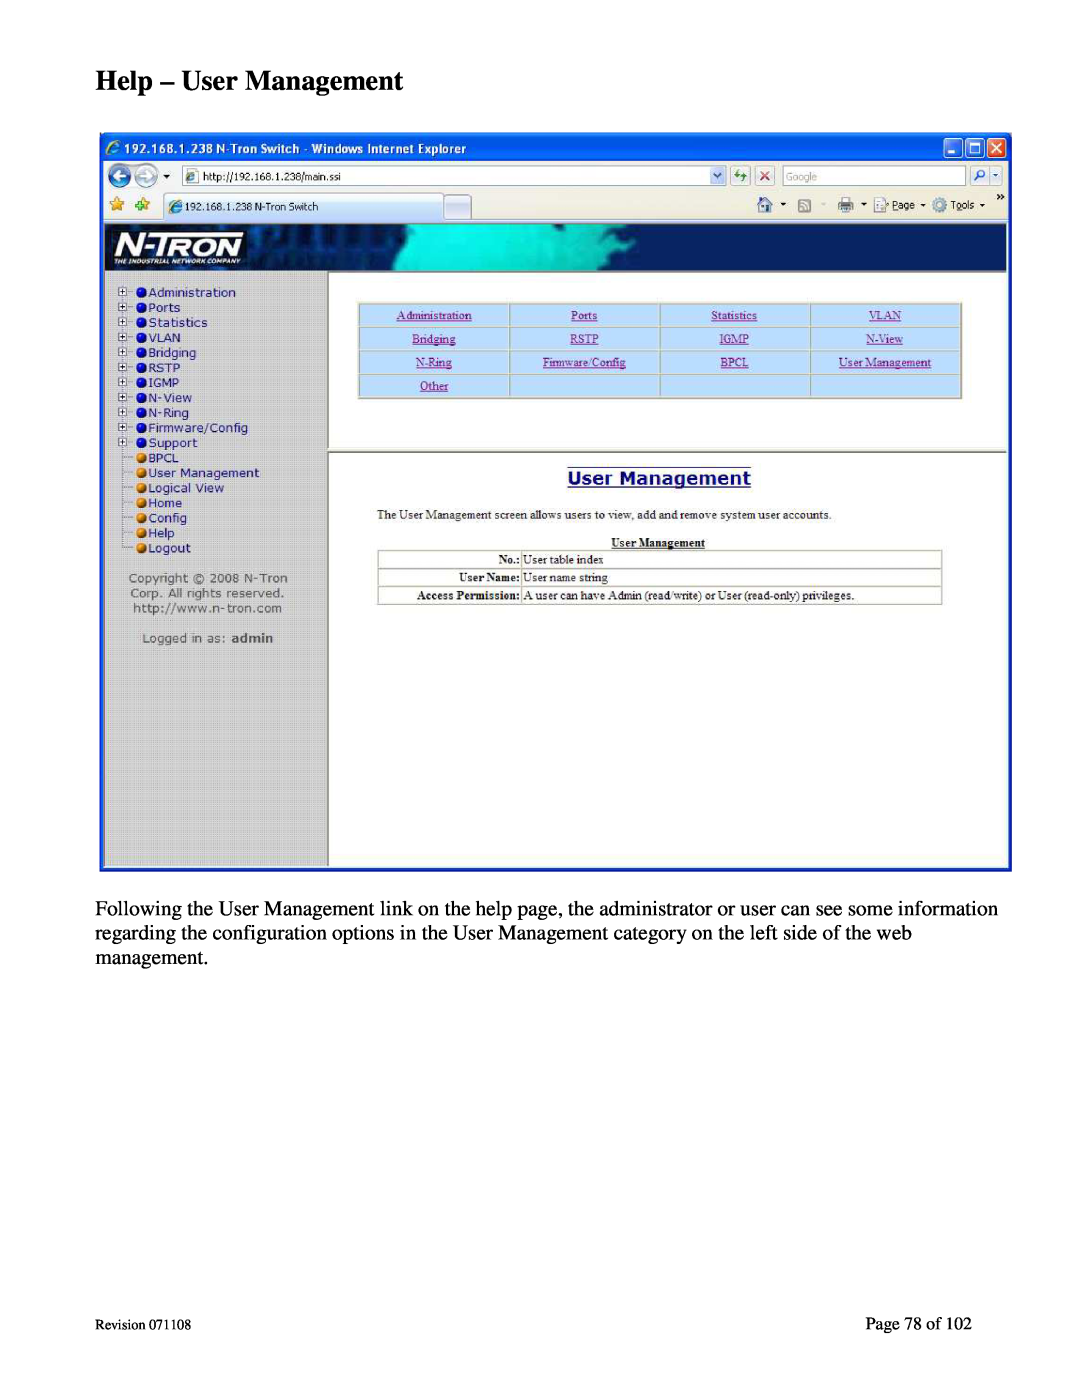 N-Tron 708M12 user manual Help - User Management, Page 78 of, Revision 